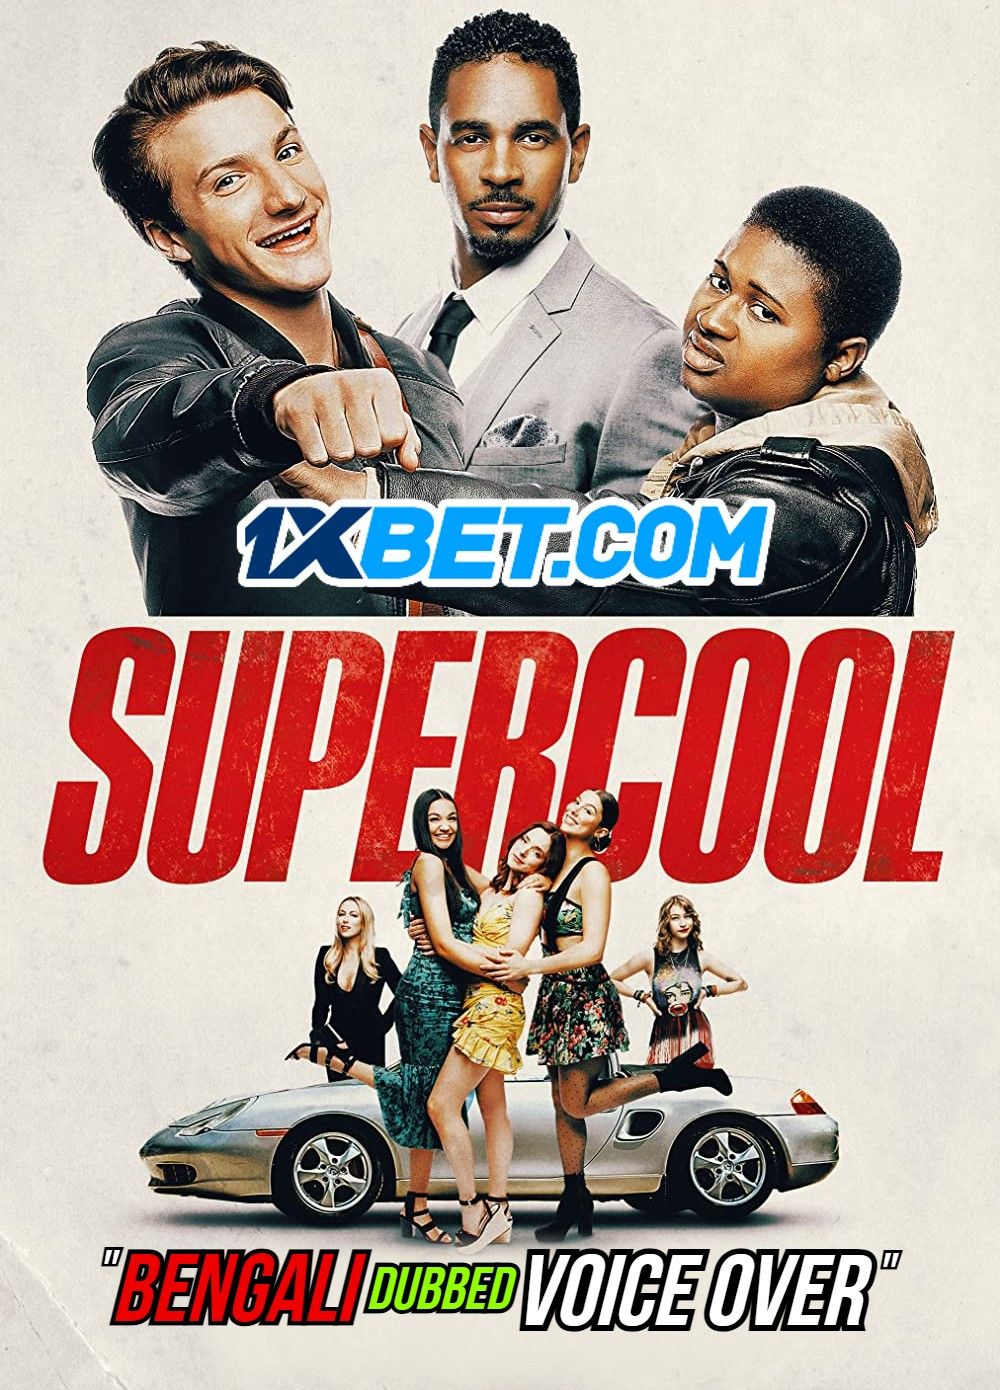 Supercool (2021) Bengali (Voice Over) Dubbed WEBRip download full movie